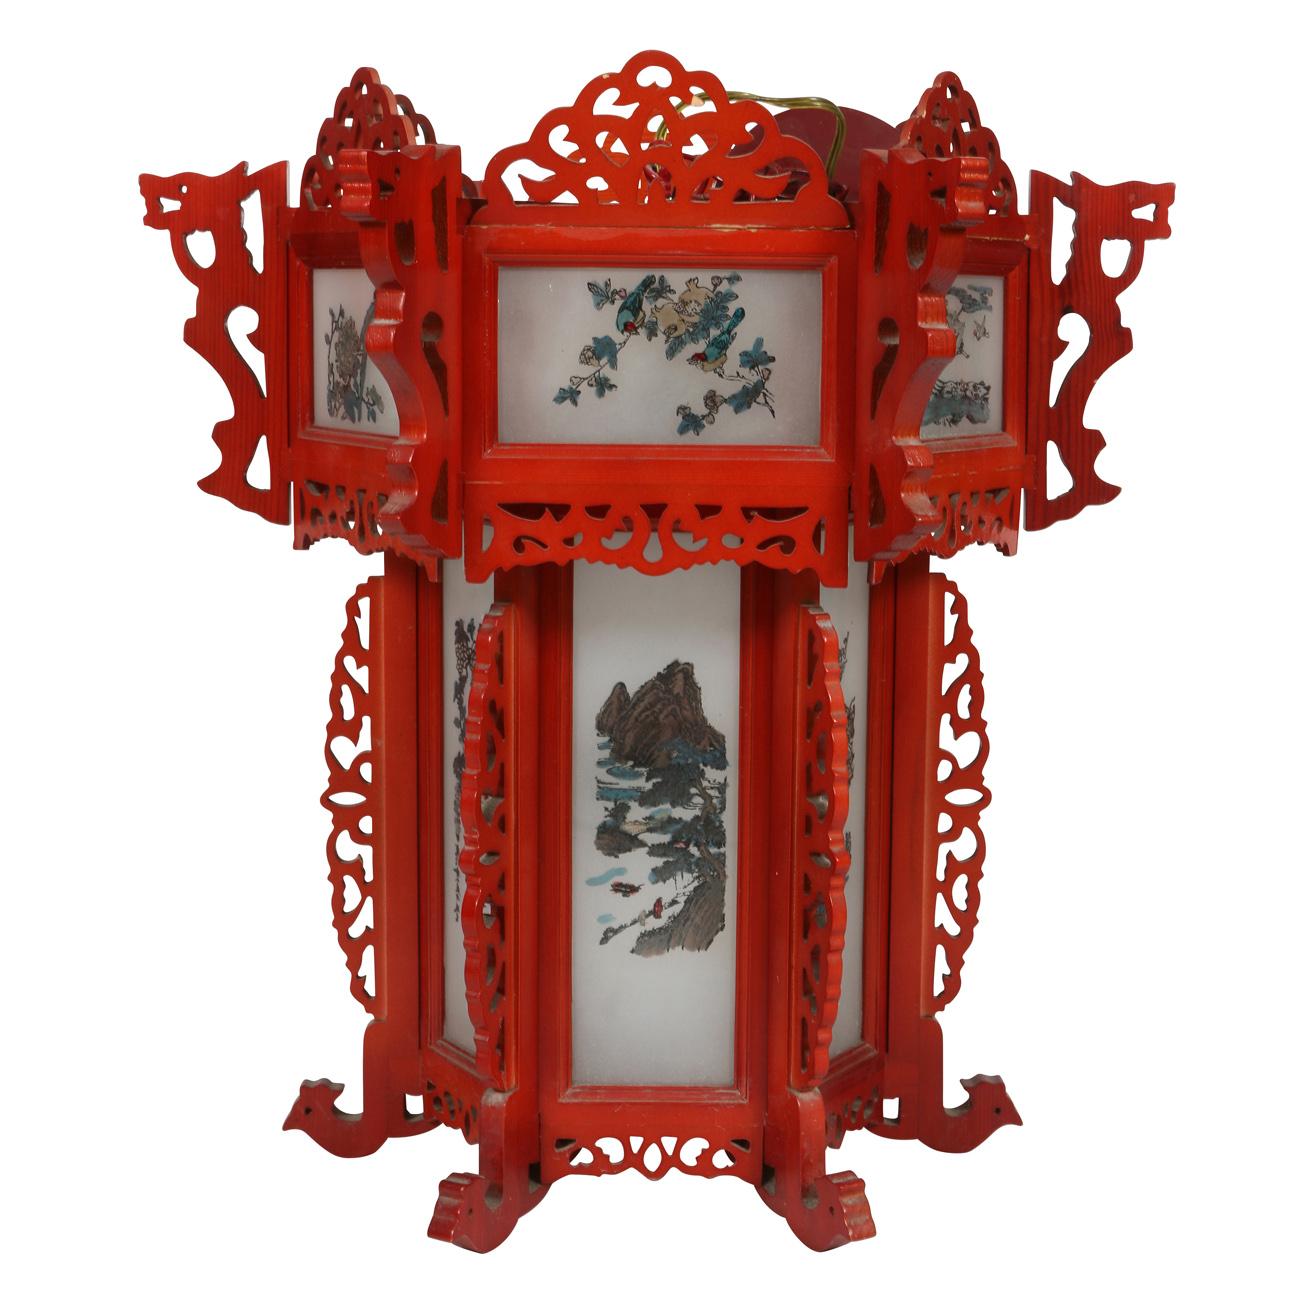 Vintage Asian lantern with fretwork and painted glass inserts, with two tiers of interior bulbs.